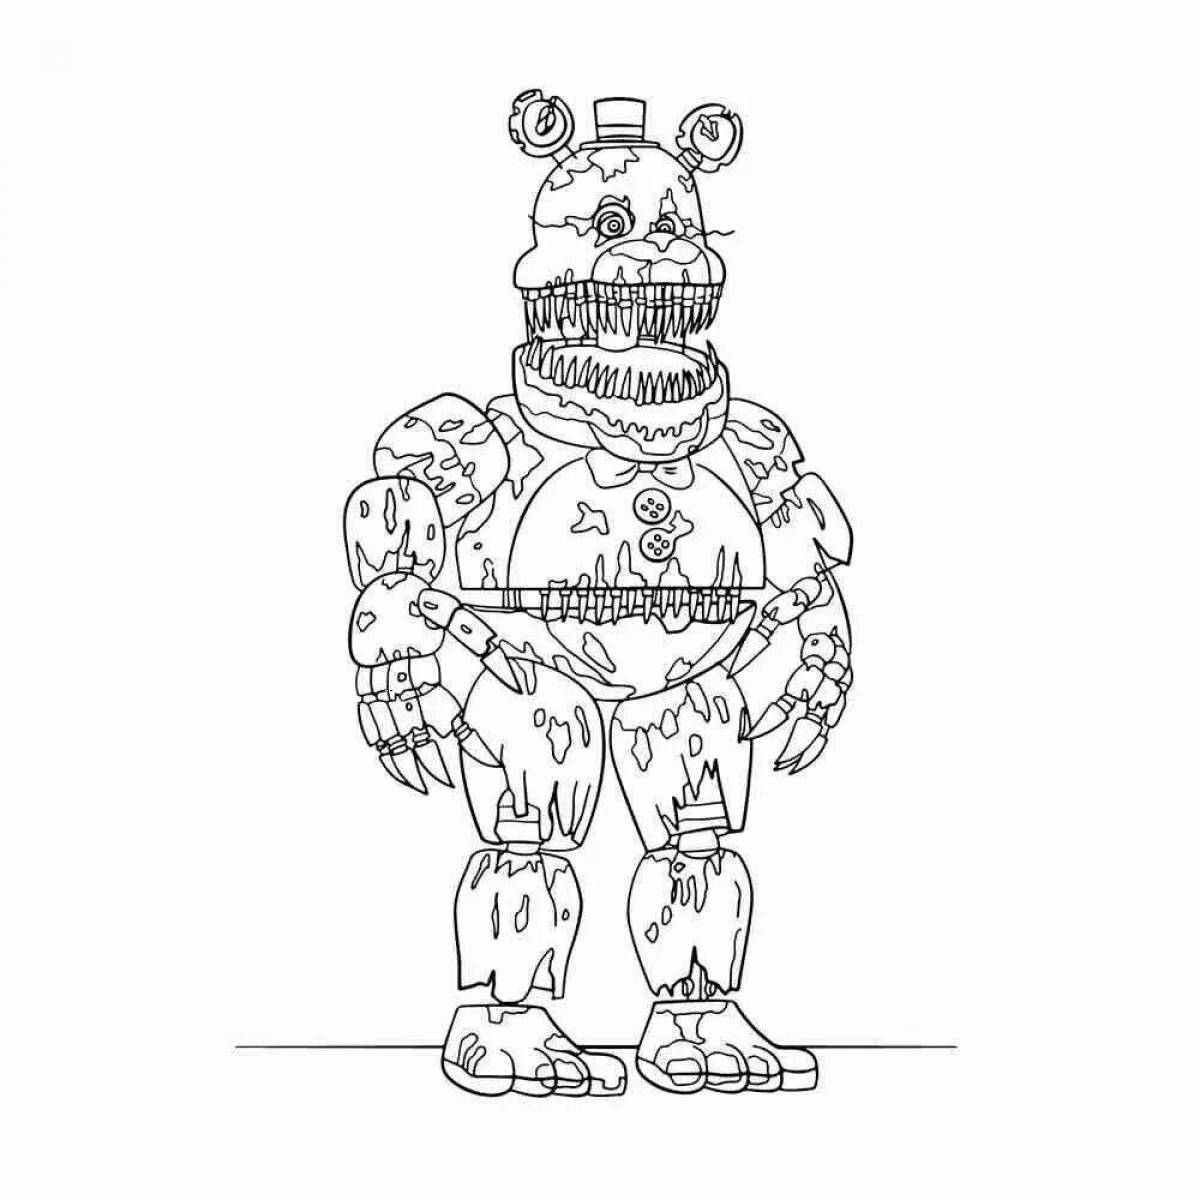 Freddy fighttime coloring page live